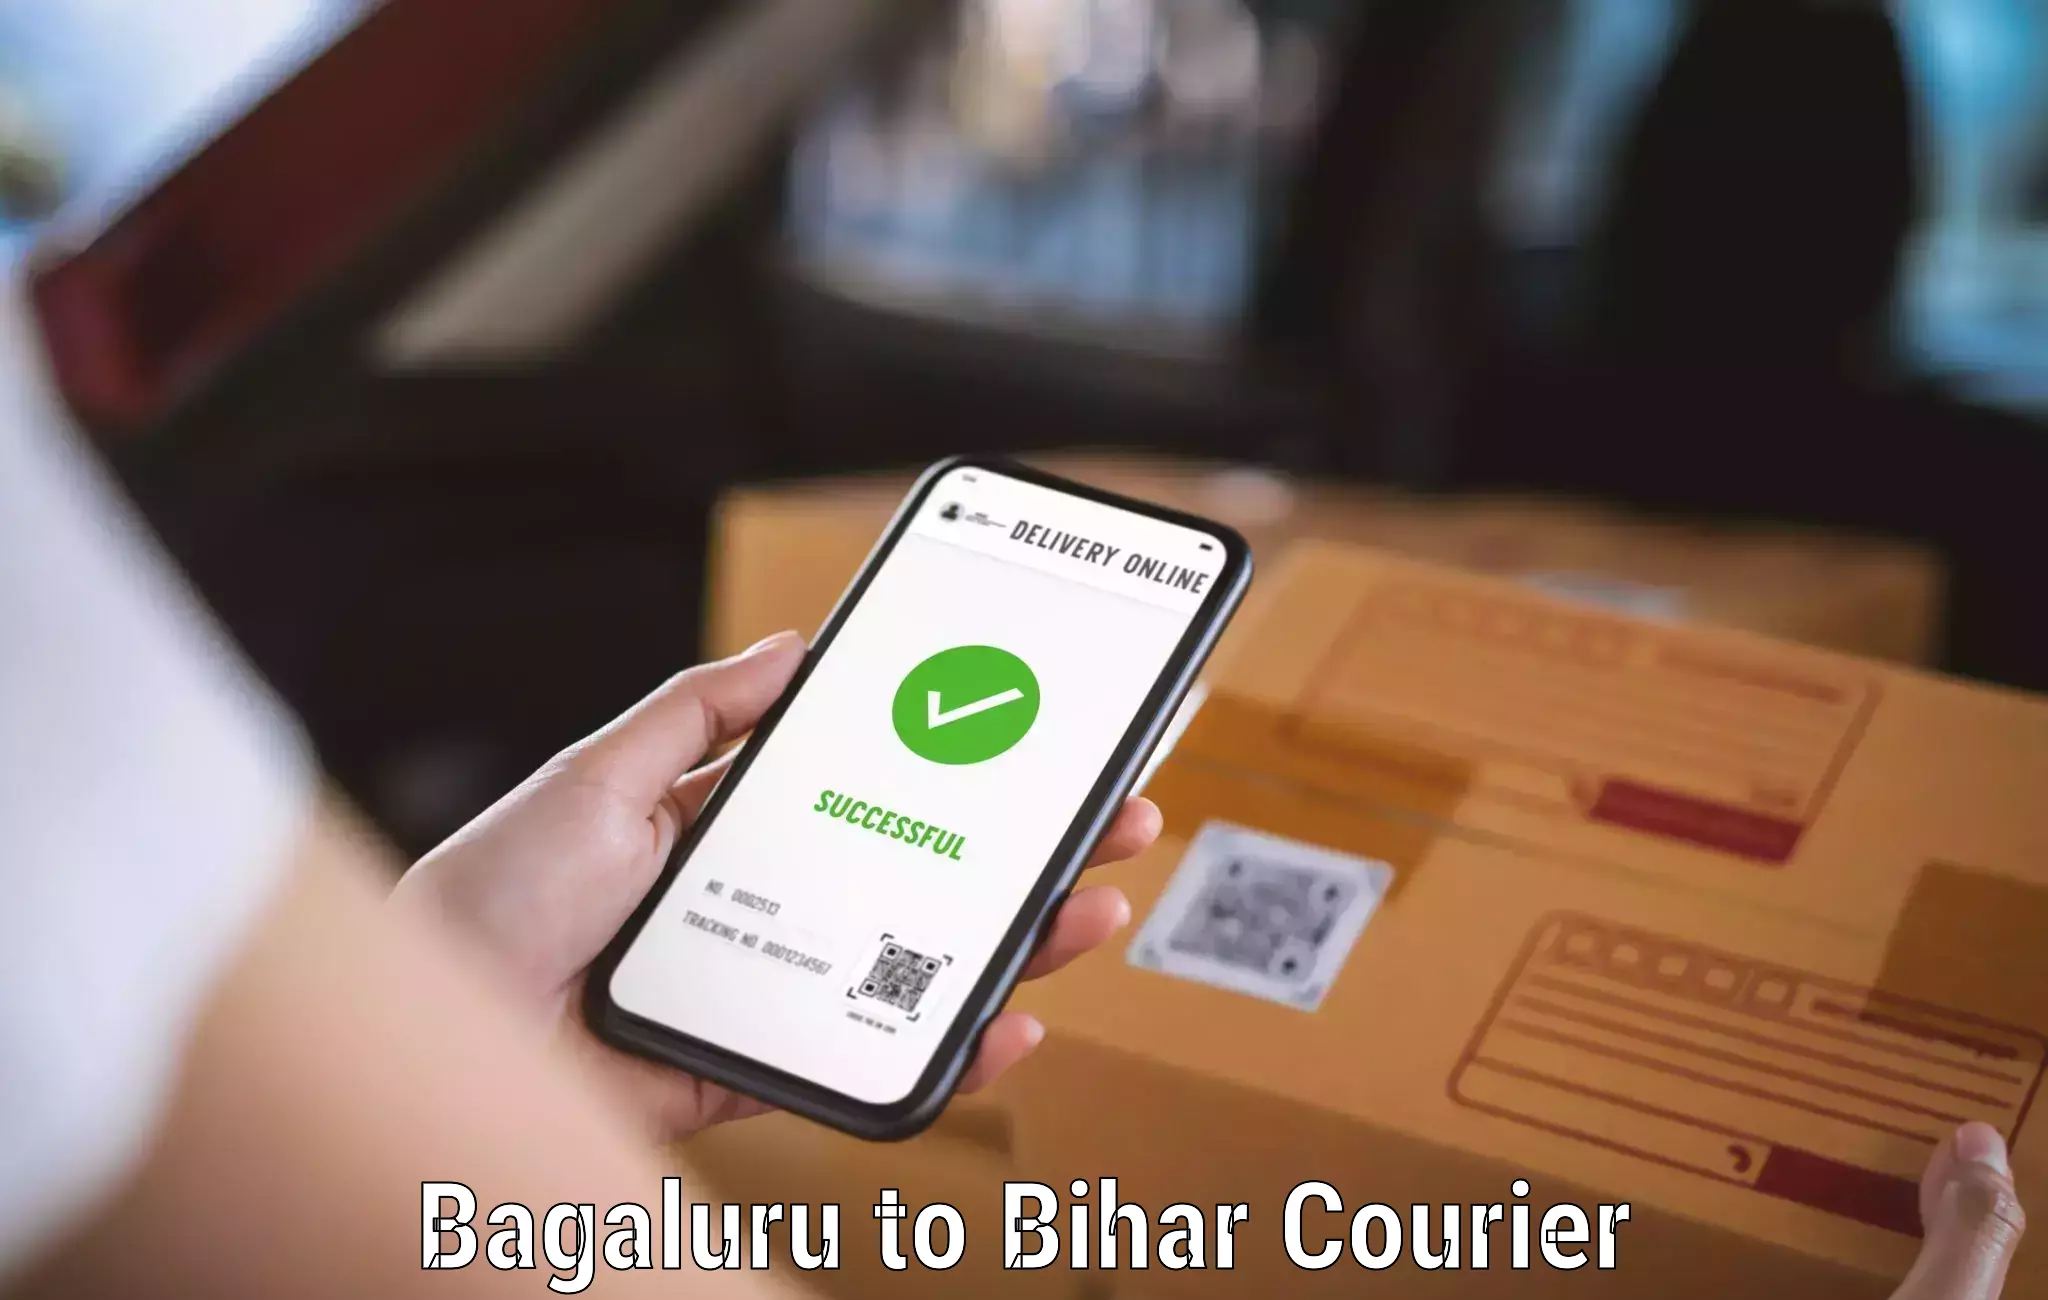 State-of-the-art courier technology Bagaluru to Pupri